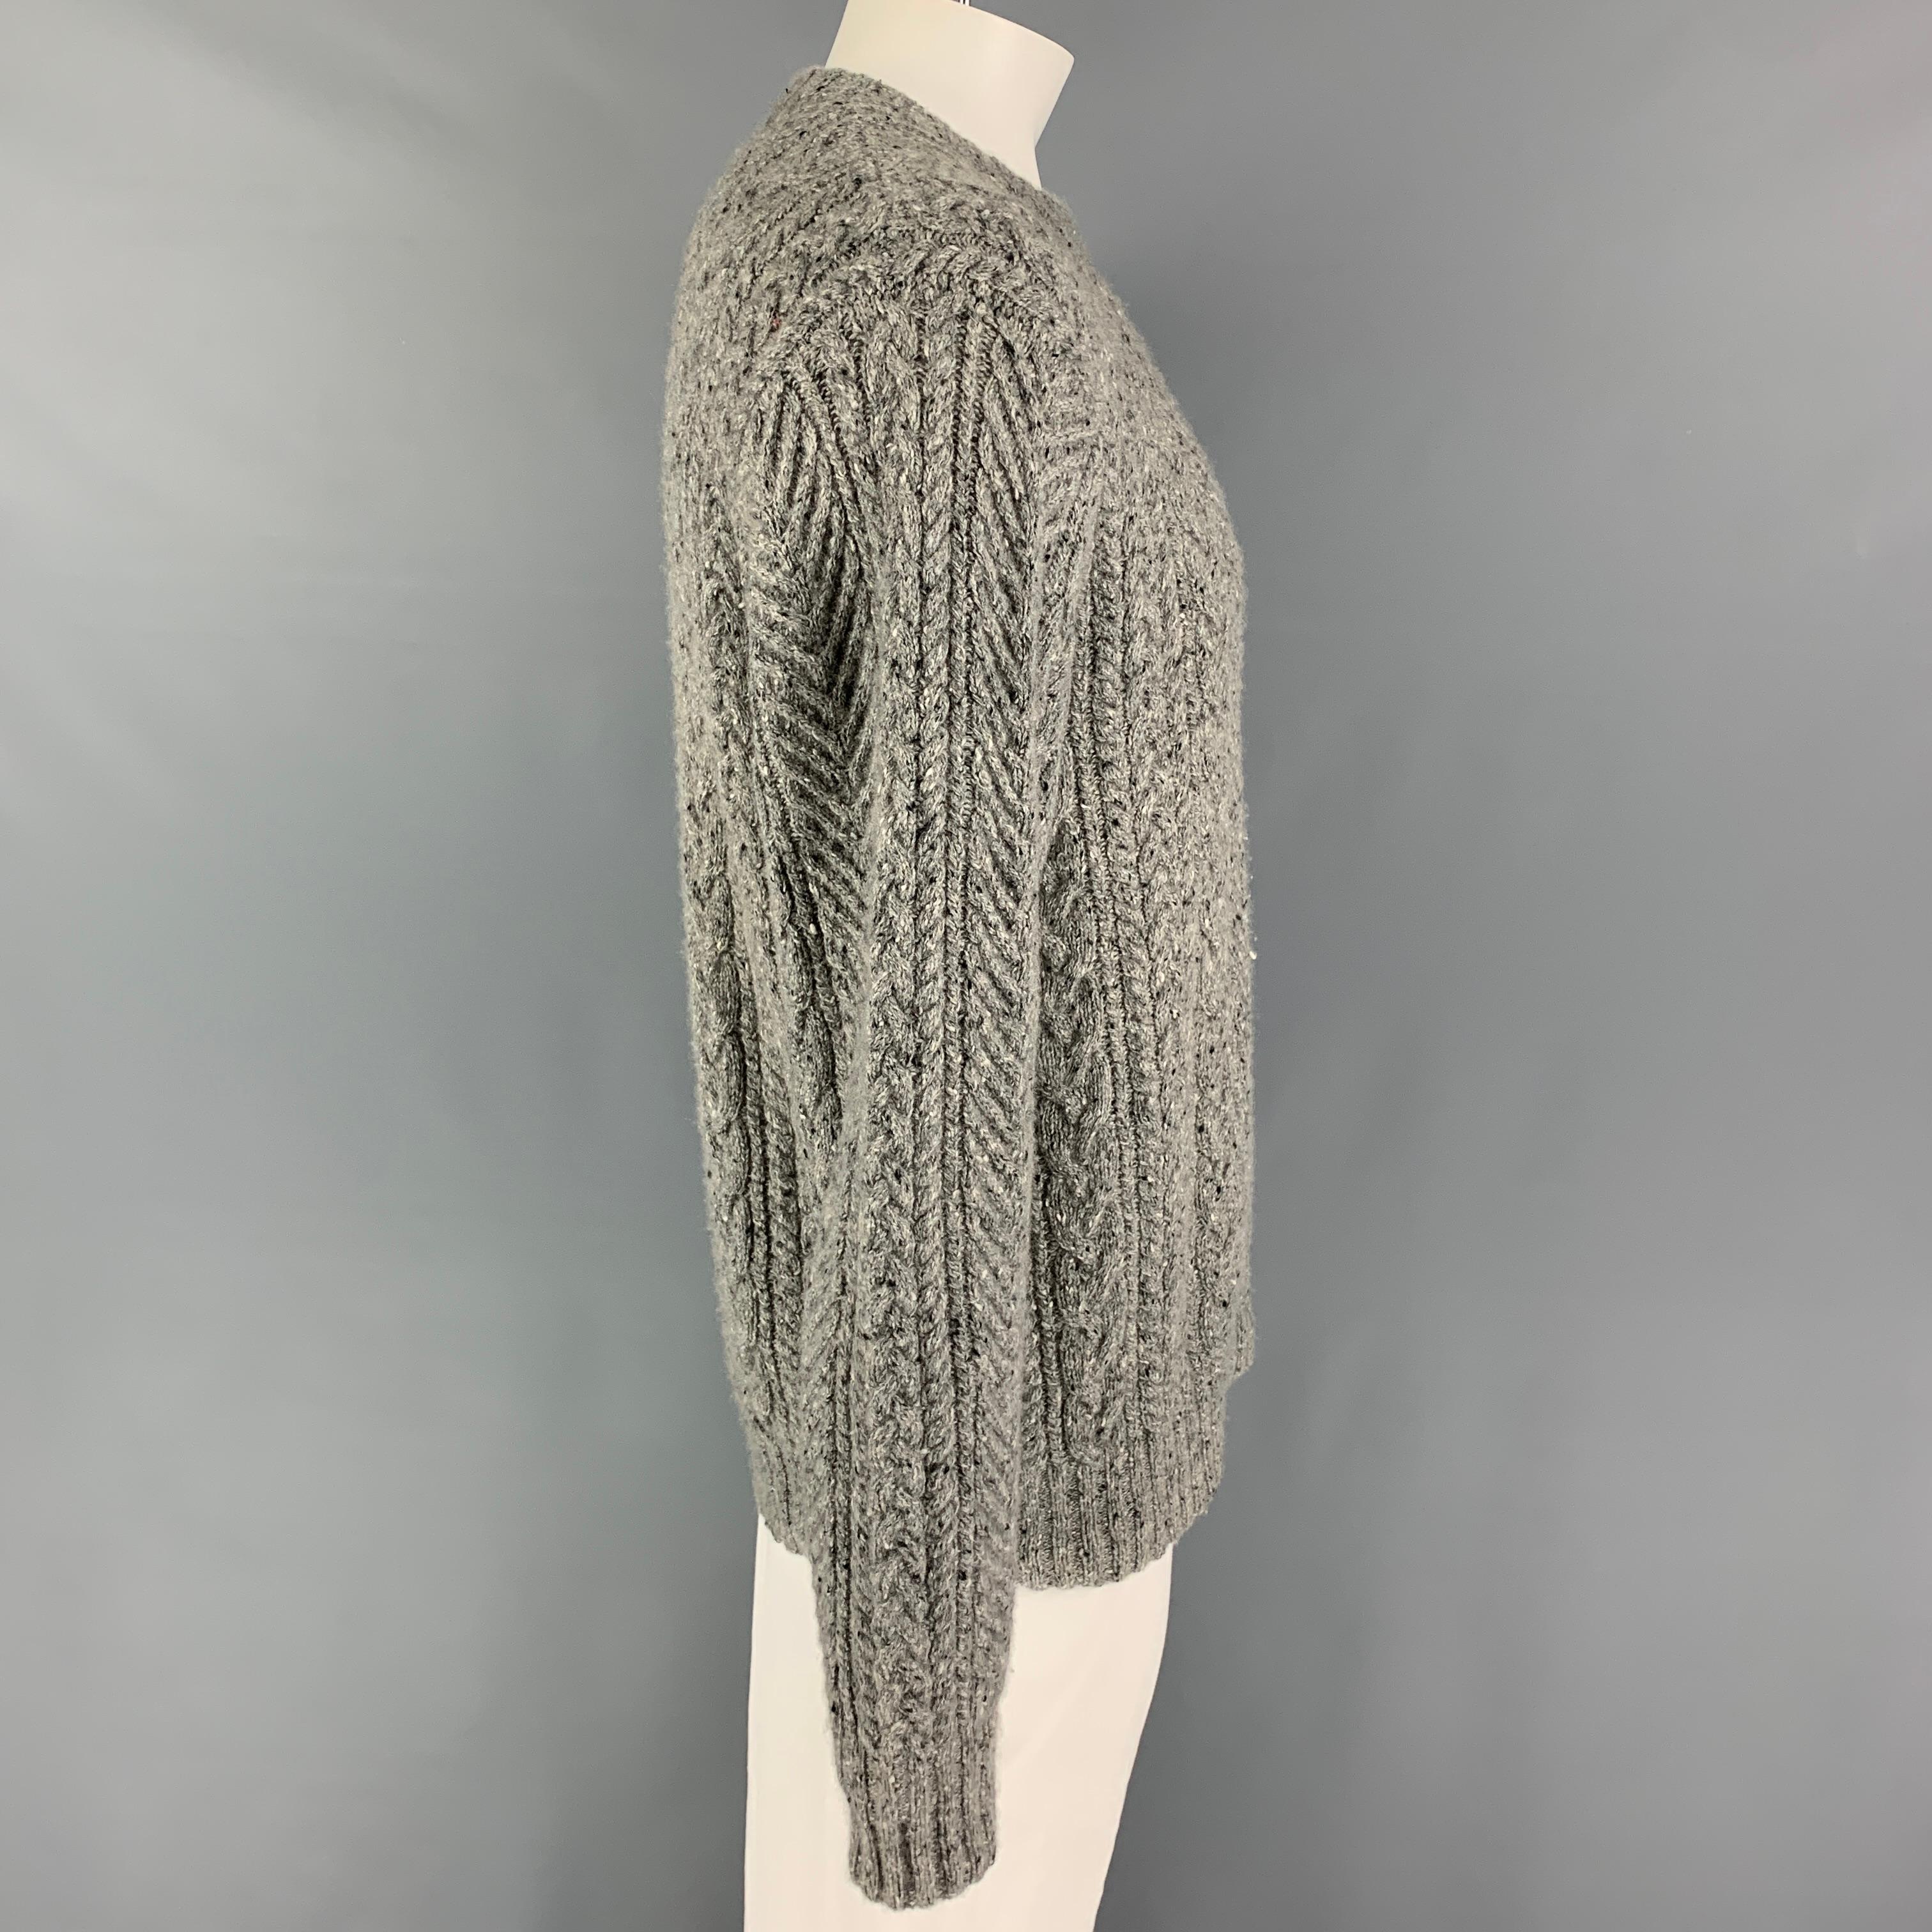 SAKS FITFH AVENUE sweater comes in a grey cable knit cashmere featuring a crew-neck. 

Excellent Pre-Owned Condition.
Marked: L

Measurements:

Shoulder: 19 in.
Chest: 44 in.
Sleeve: 27 in.
Length: 29 in.